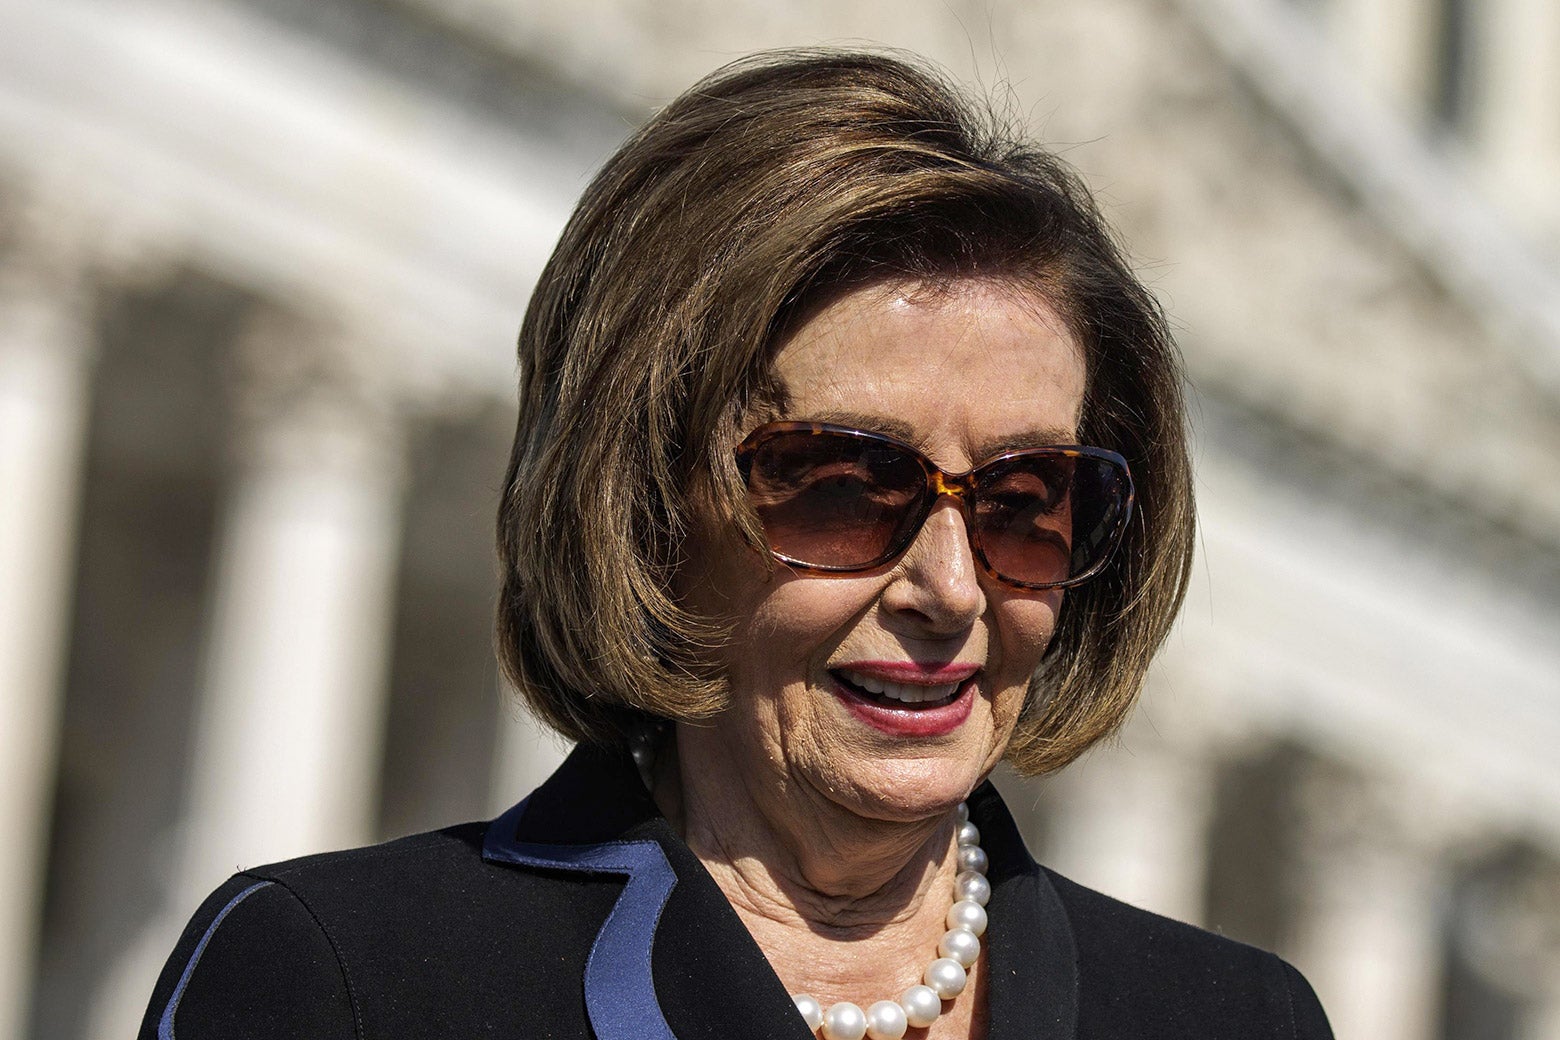 A photo of Nancy Pelosi, wearing sunglasses, standing in front of the Capitol.